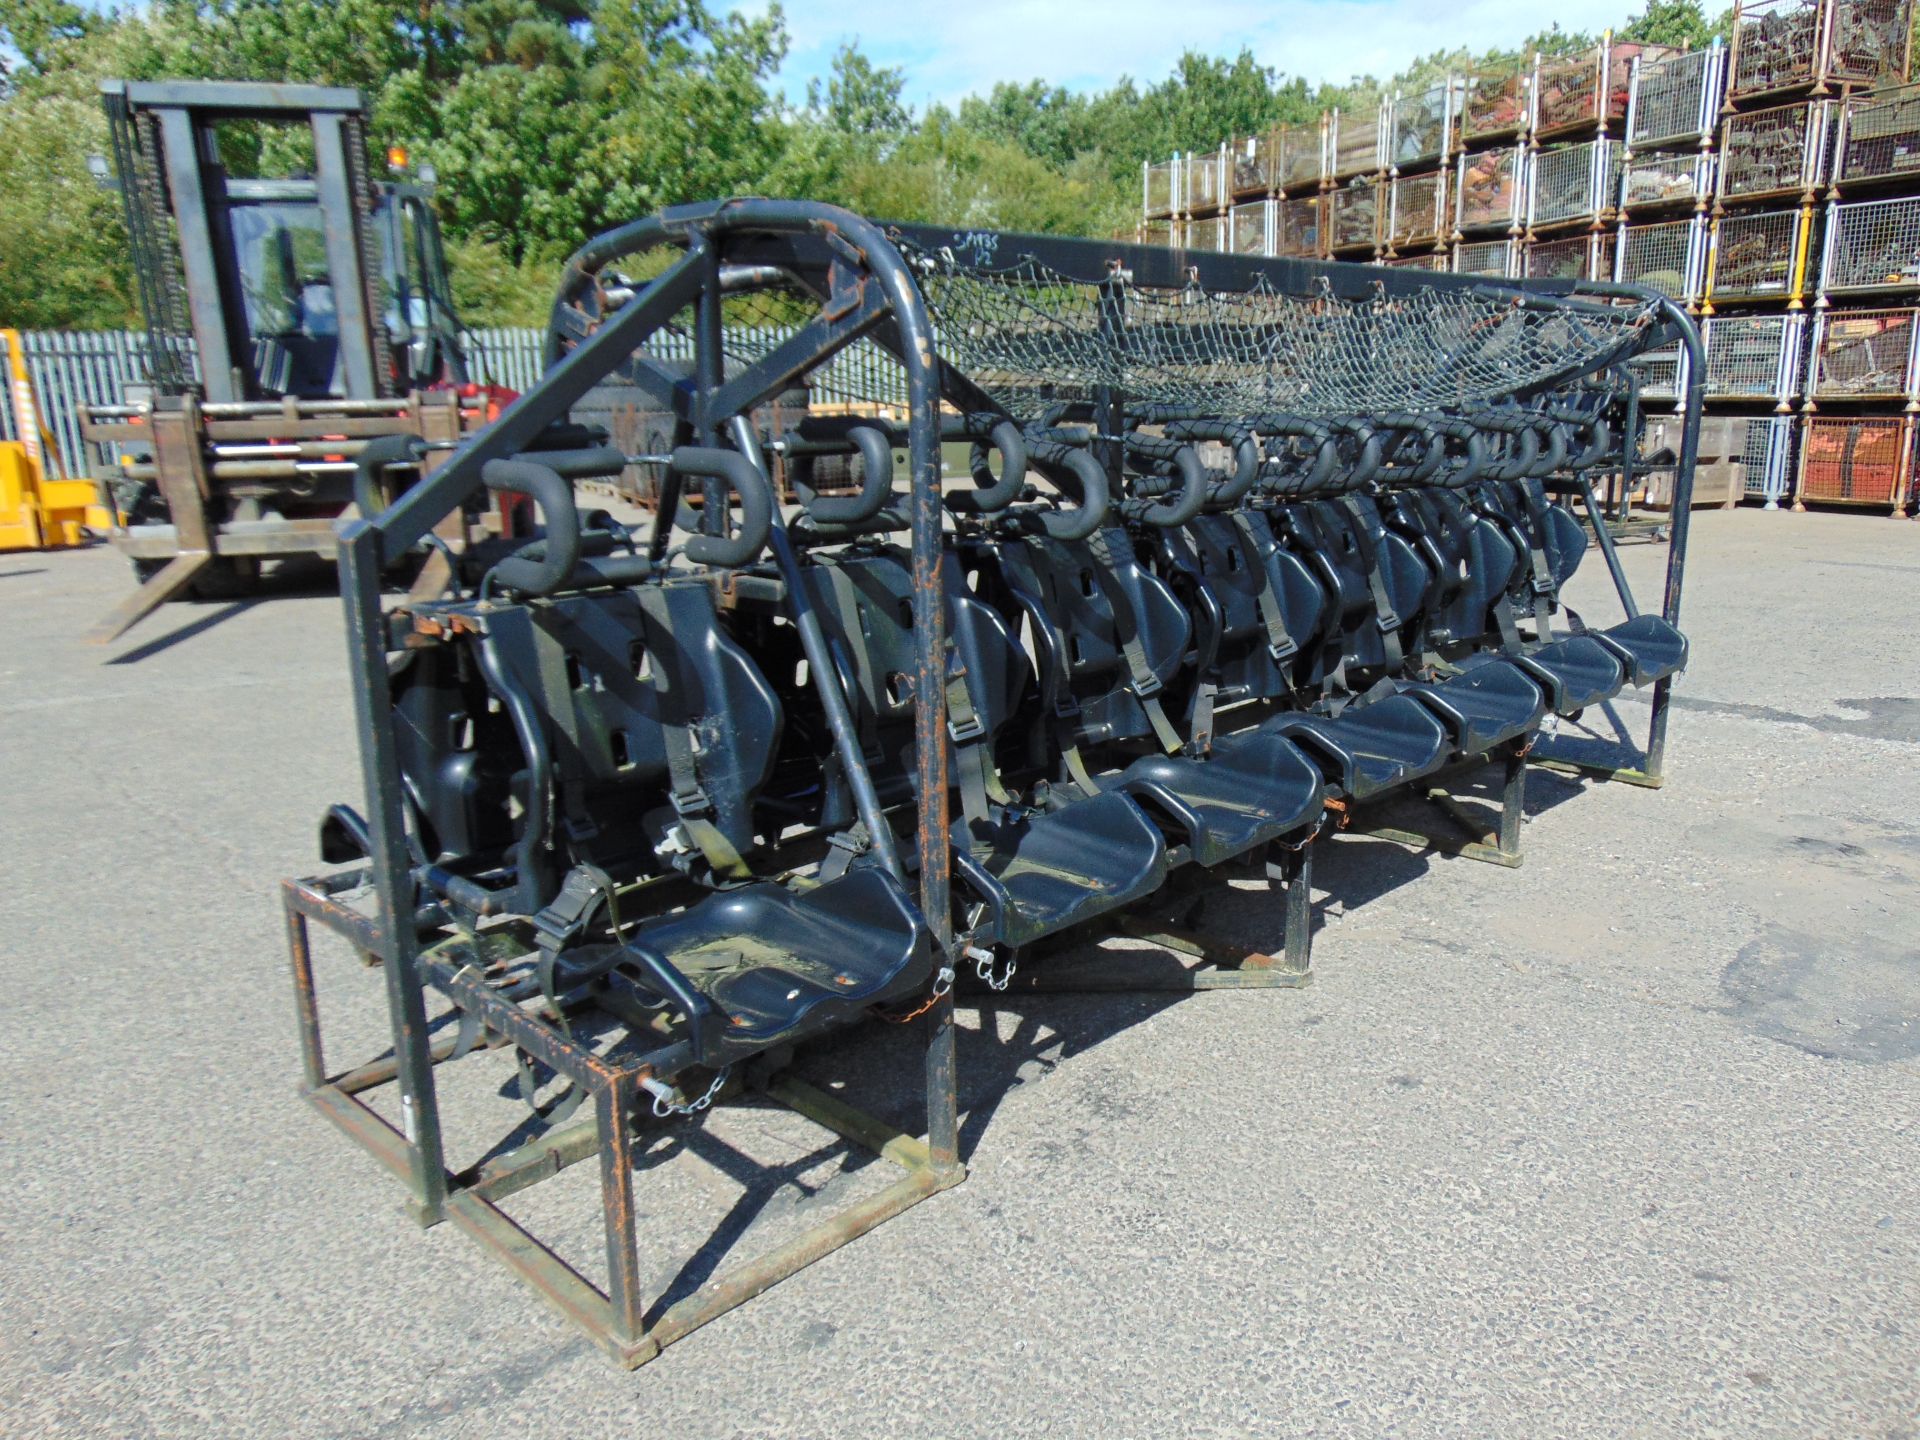 14 Man Security Seat suitable for Leyland Dafs, Bedfords etc - Image 3 of 8